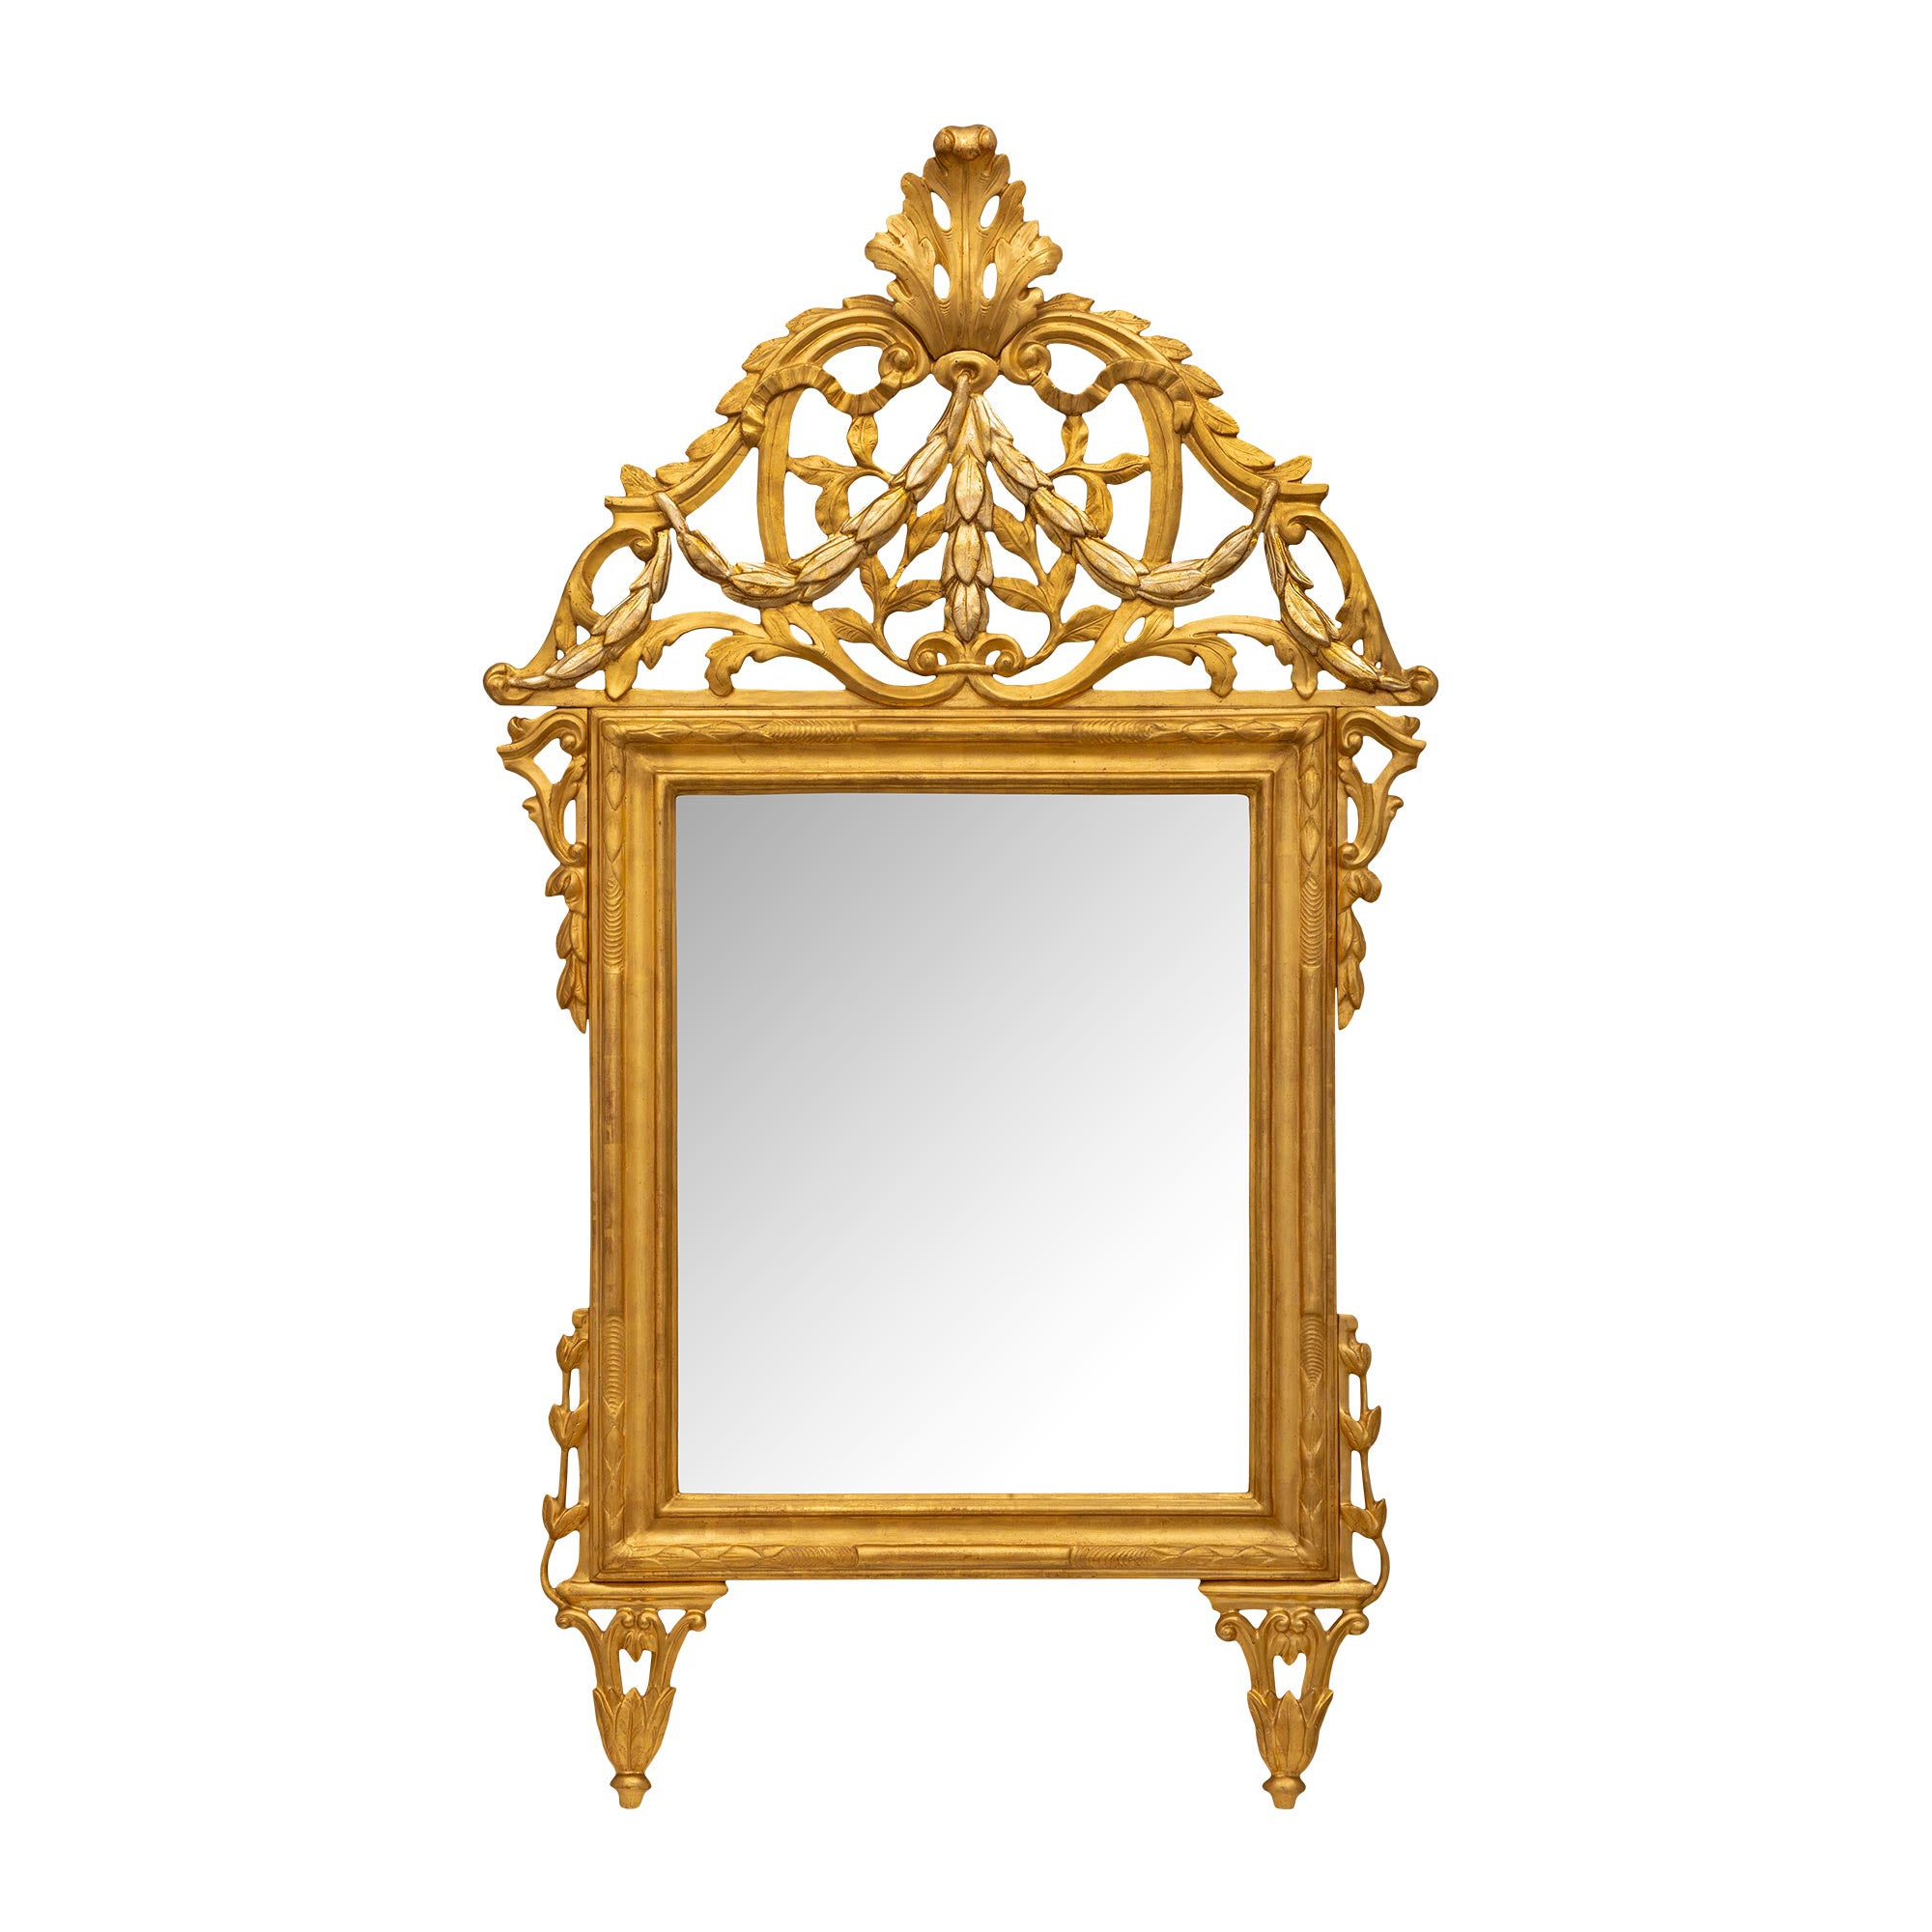 Italian 18th Century Louis XIV Period Giltwood And Silvered Mecca Mirror For Sale